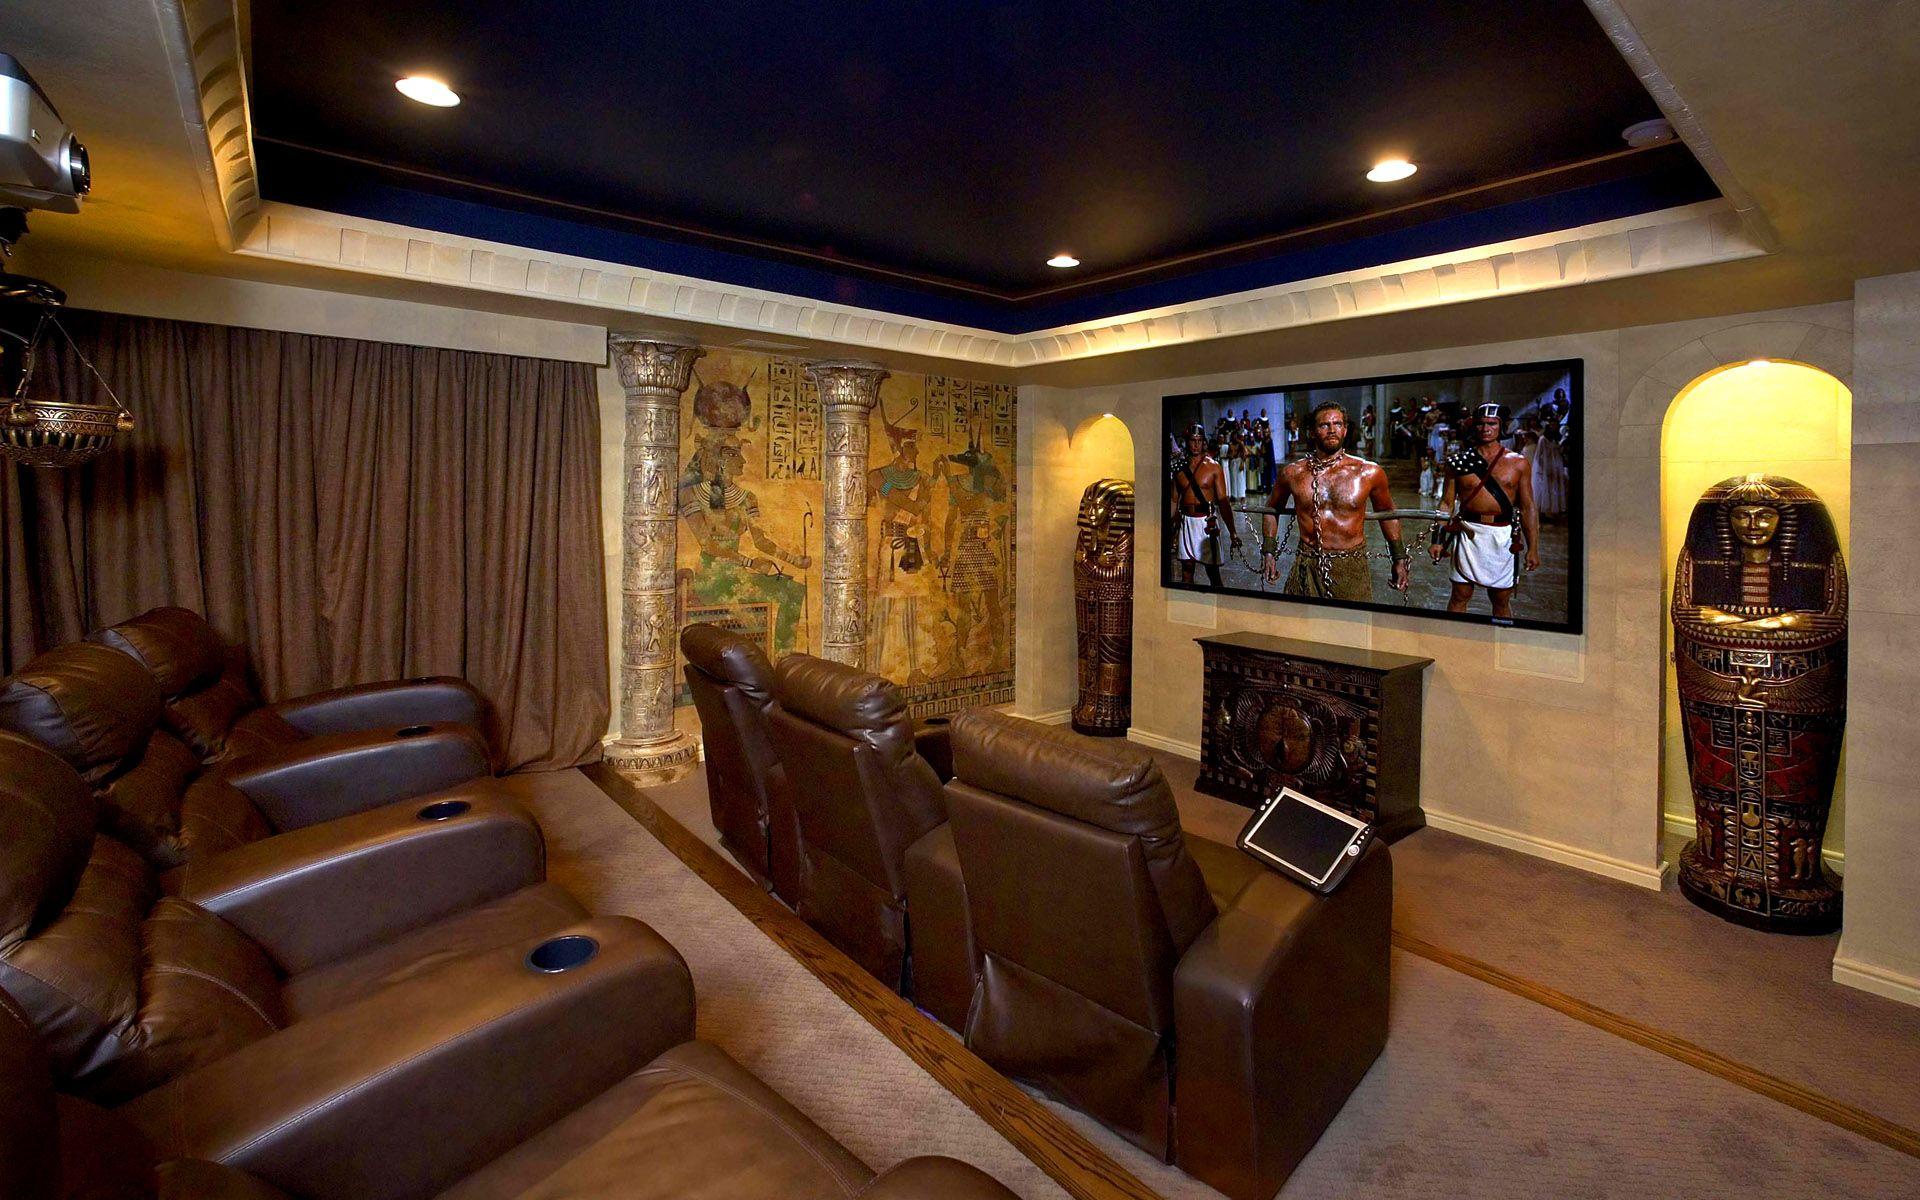 Home Theater Rooms wallpaper. Home theater rooms, Home theater